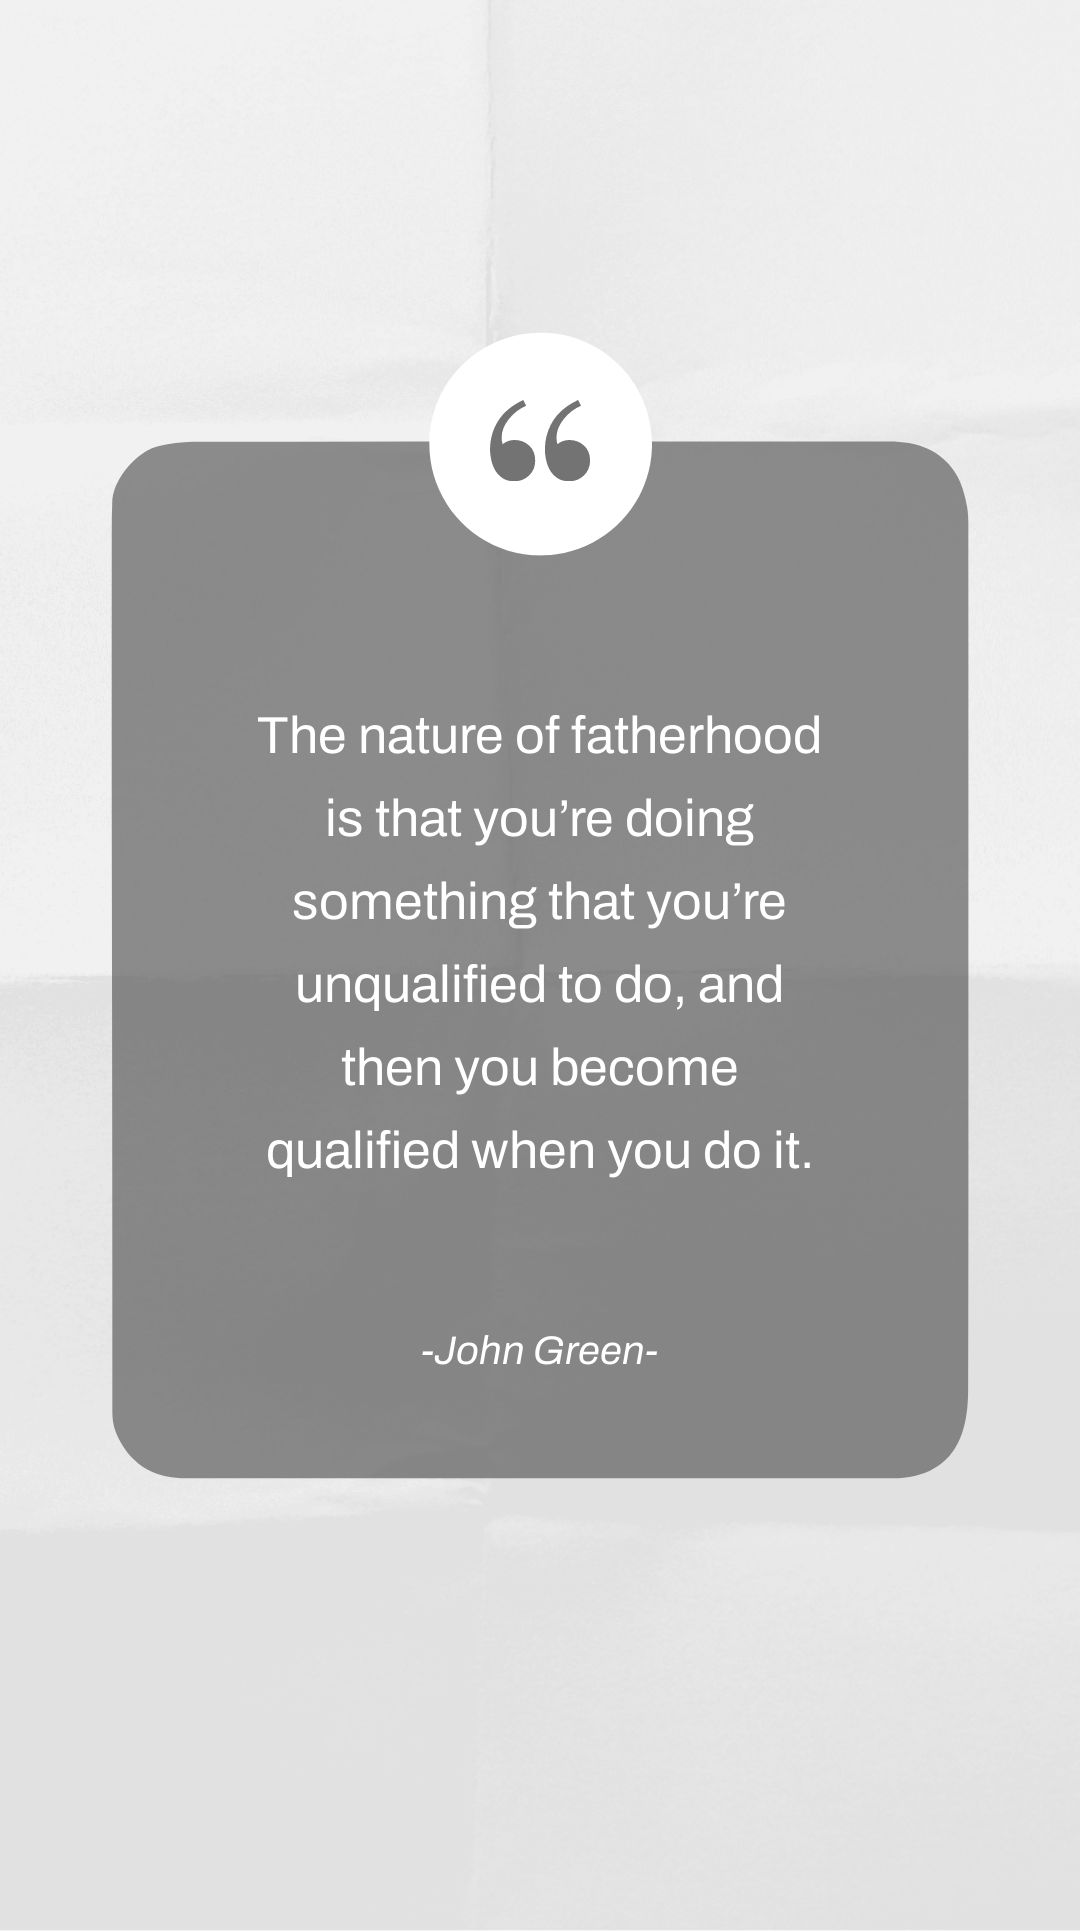 John Green - The nature of fatherhood is that you’re doing something that you’re unqualified to do, and then you become qualified when you do it.